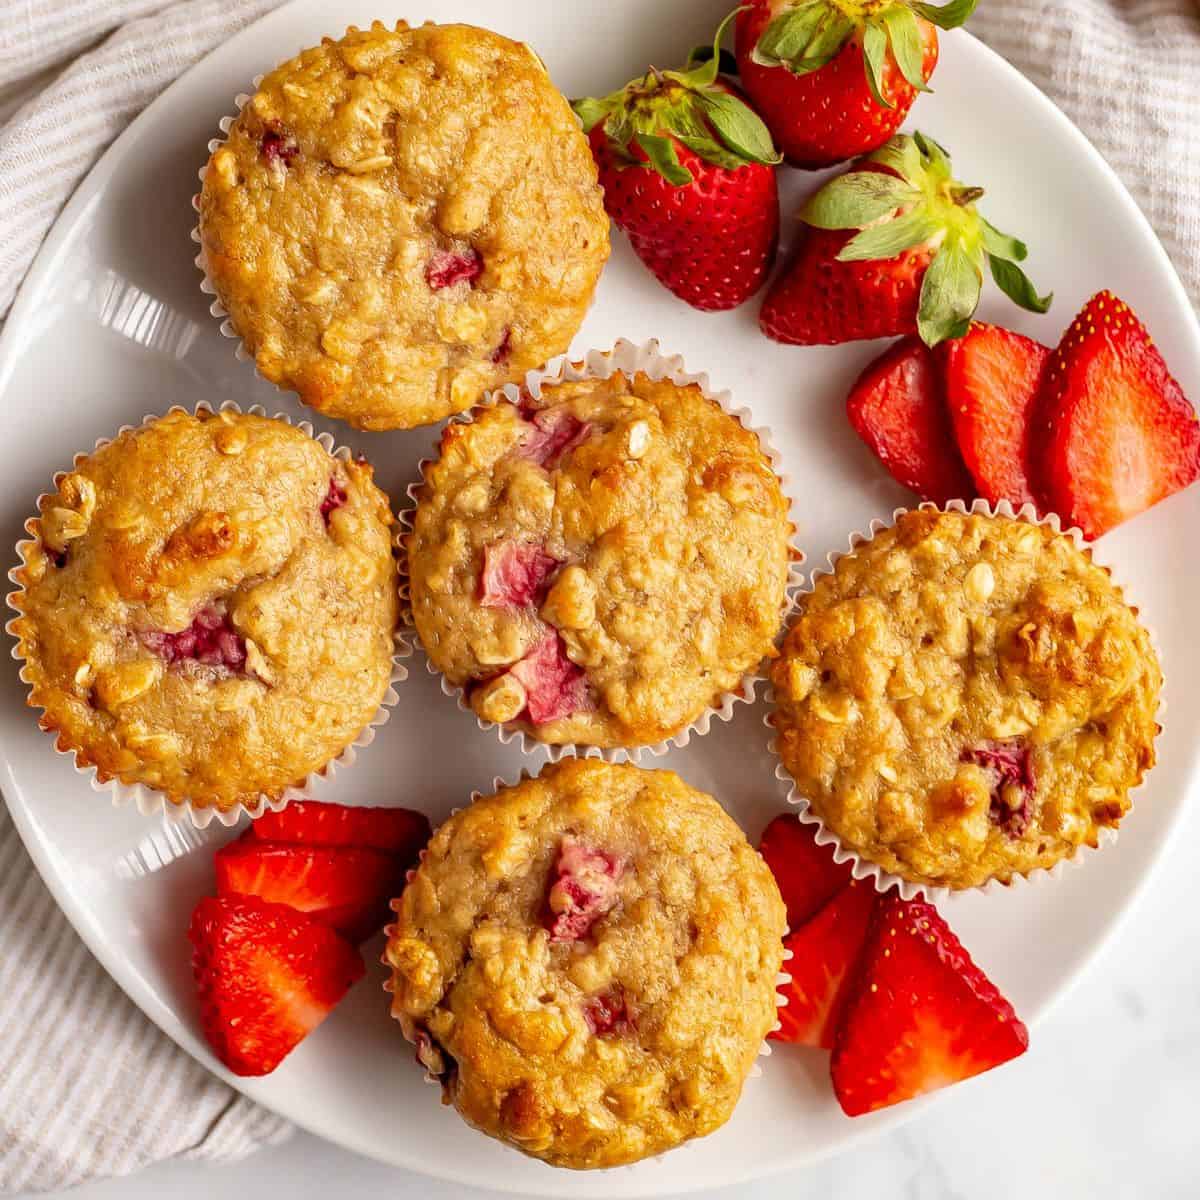 Close up of baked healthy strawberry banana muffins served on a white plate with sliced and whole strawberries.